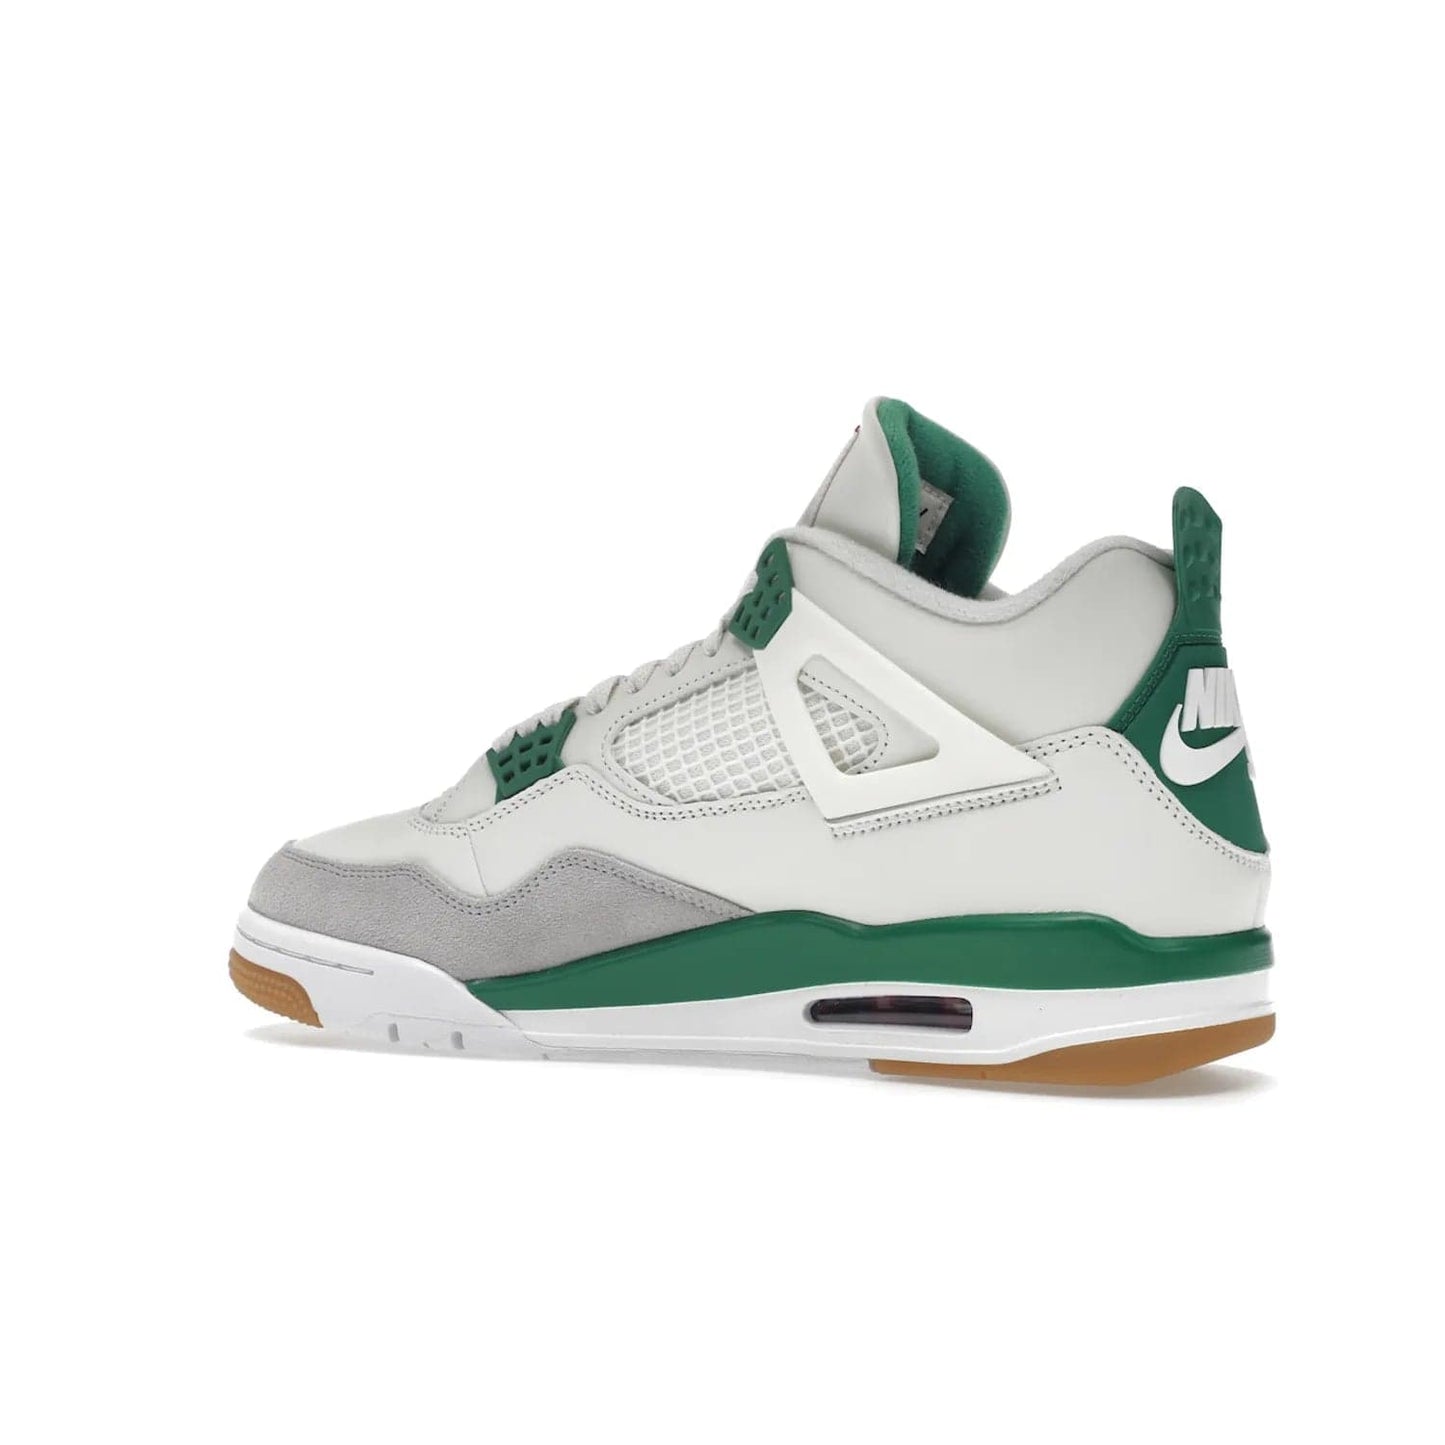 Jordan 4 Retro SB Pine Green - Image 22 - Only at www.BallersClubKickz.com - A white leather upper combined with a Neutral Grey suede mudguard gives this limited Air Jordan 4 Retro SB Pine Green sneaker its unmistakable style. Released March 20, 2023, the Jordan 4 Retro SB features a white and Pine Green midsole plus a red air unit with a gum outsole for grip. The perfect blend of Nike SB skateboarding and Jordan 4 classic design.